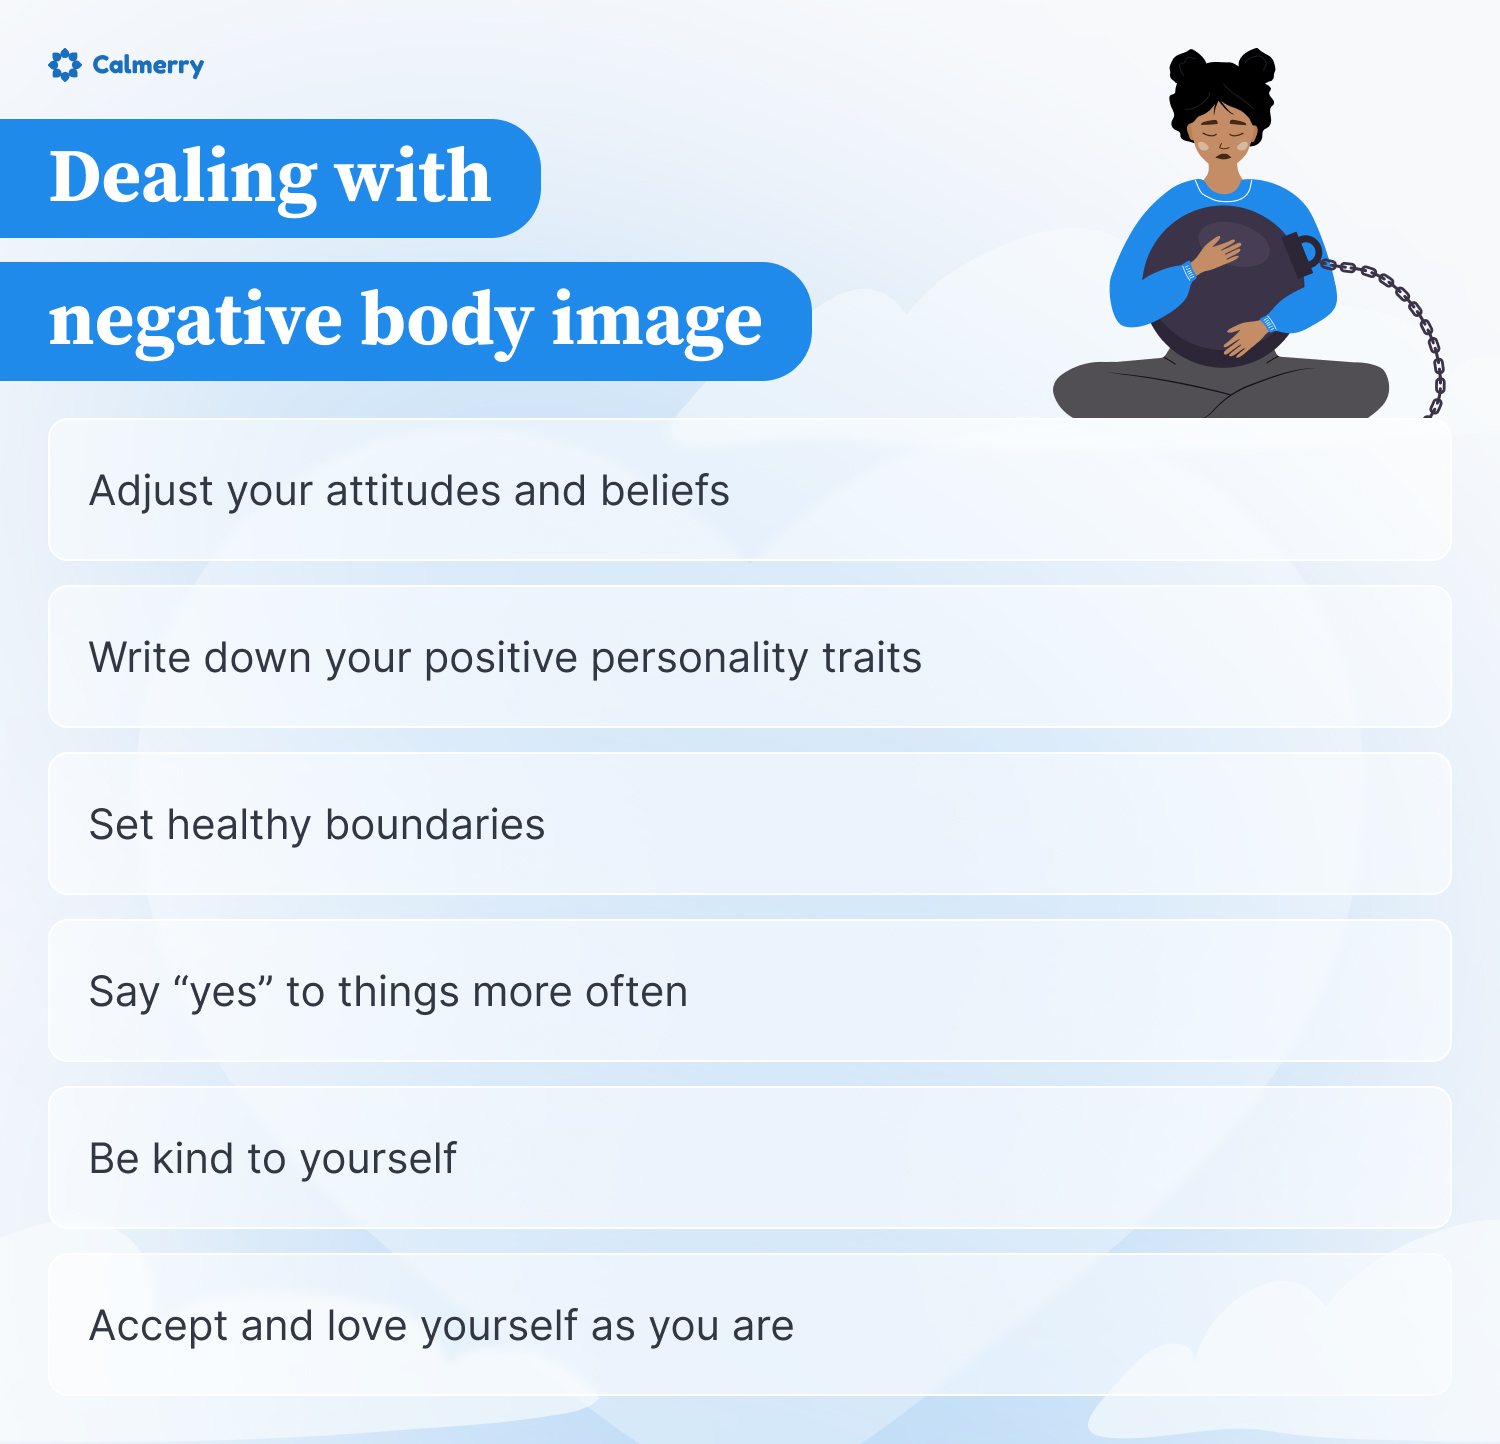 This image addresses strategies for dealing with negative body image. It features the Calmerry logo and a girl hugging a heavy ball chained to her, symbolizing the burden of poor self-image. The image lists six recommendations to combat negative body image:
Adjust your attitudes and beliefs
Write down your positive personality traits
Set healthy boundaries
Say "yes" to things more often
Be kind to yourself
Accept and love yourself as you are
These tips aim to help individuals shift their mindset and develop a healthier relationship with their body and self-perception. The illustration and advice underscore the challenges of negative body image while offering practical steps towards self-acceptance and positivity.